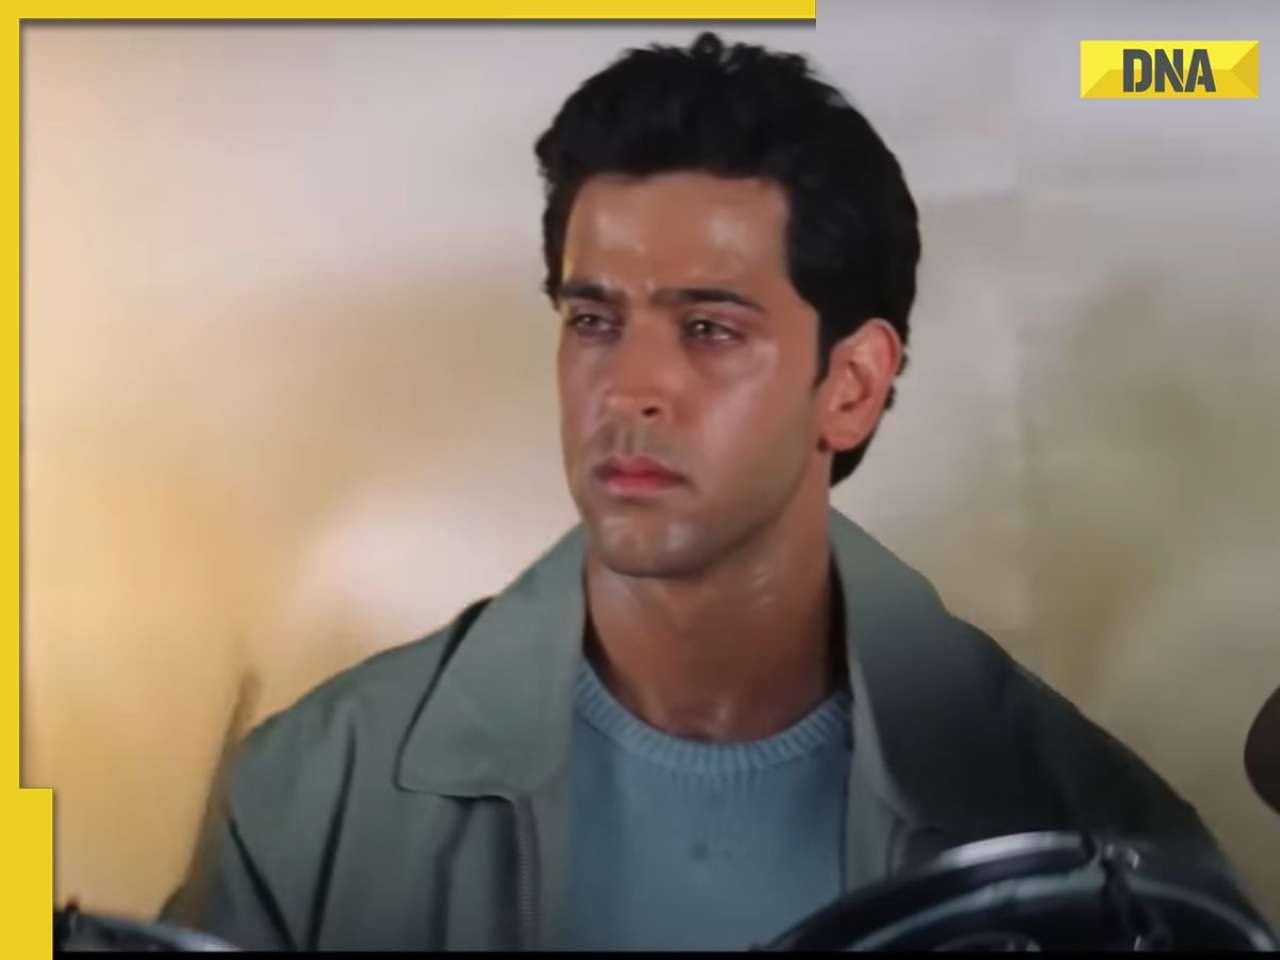 Hrithik Roshan's biggest flop was promoted as next Kaho Naa Pyar Hai, earned just Rs 2 crore, director never cast him